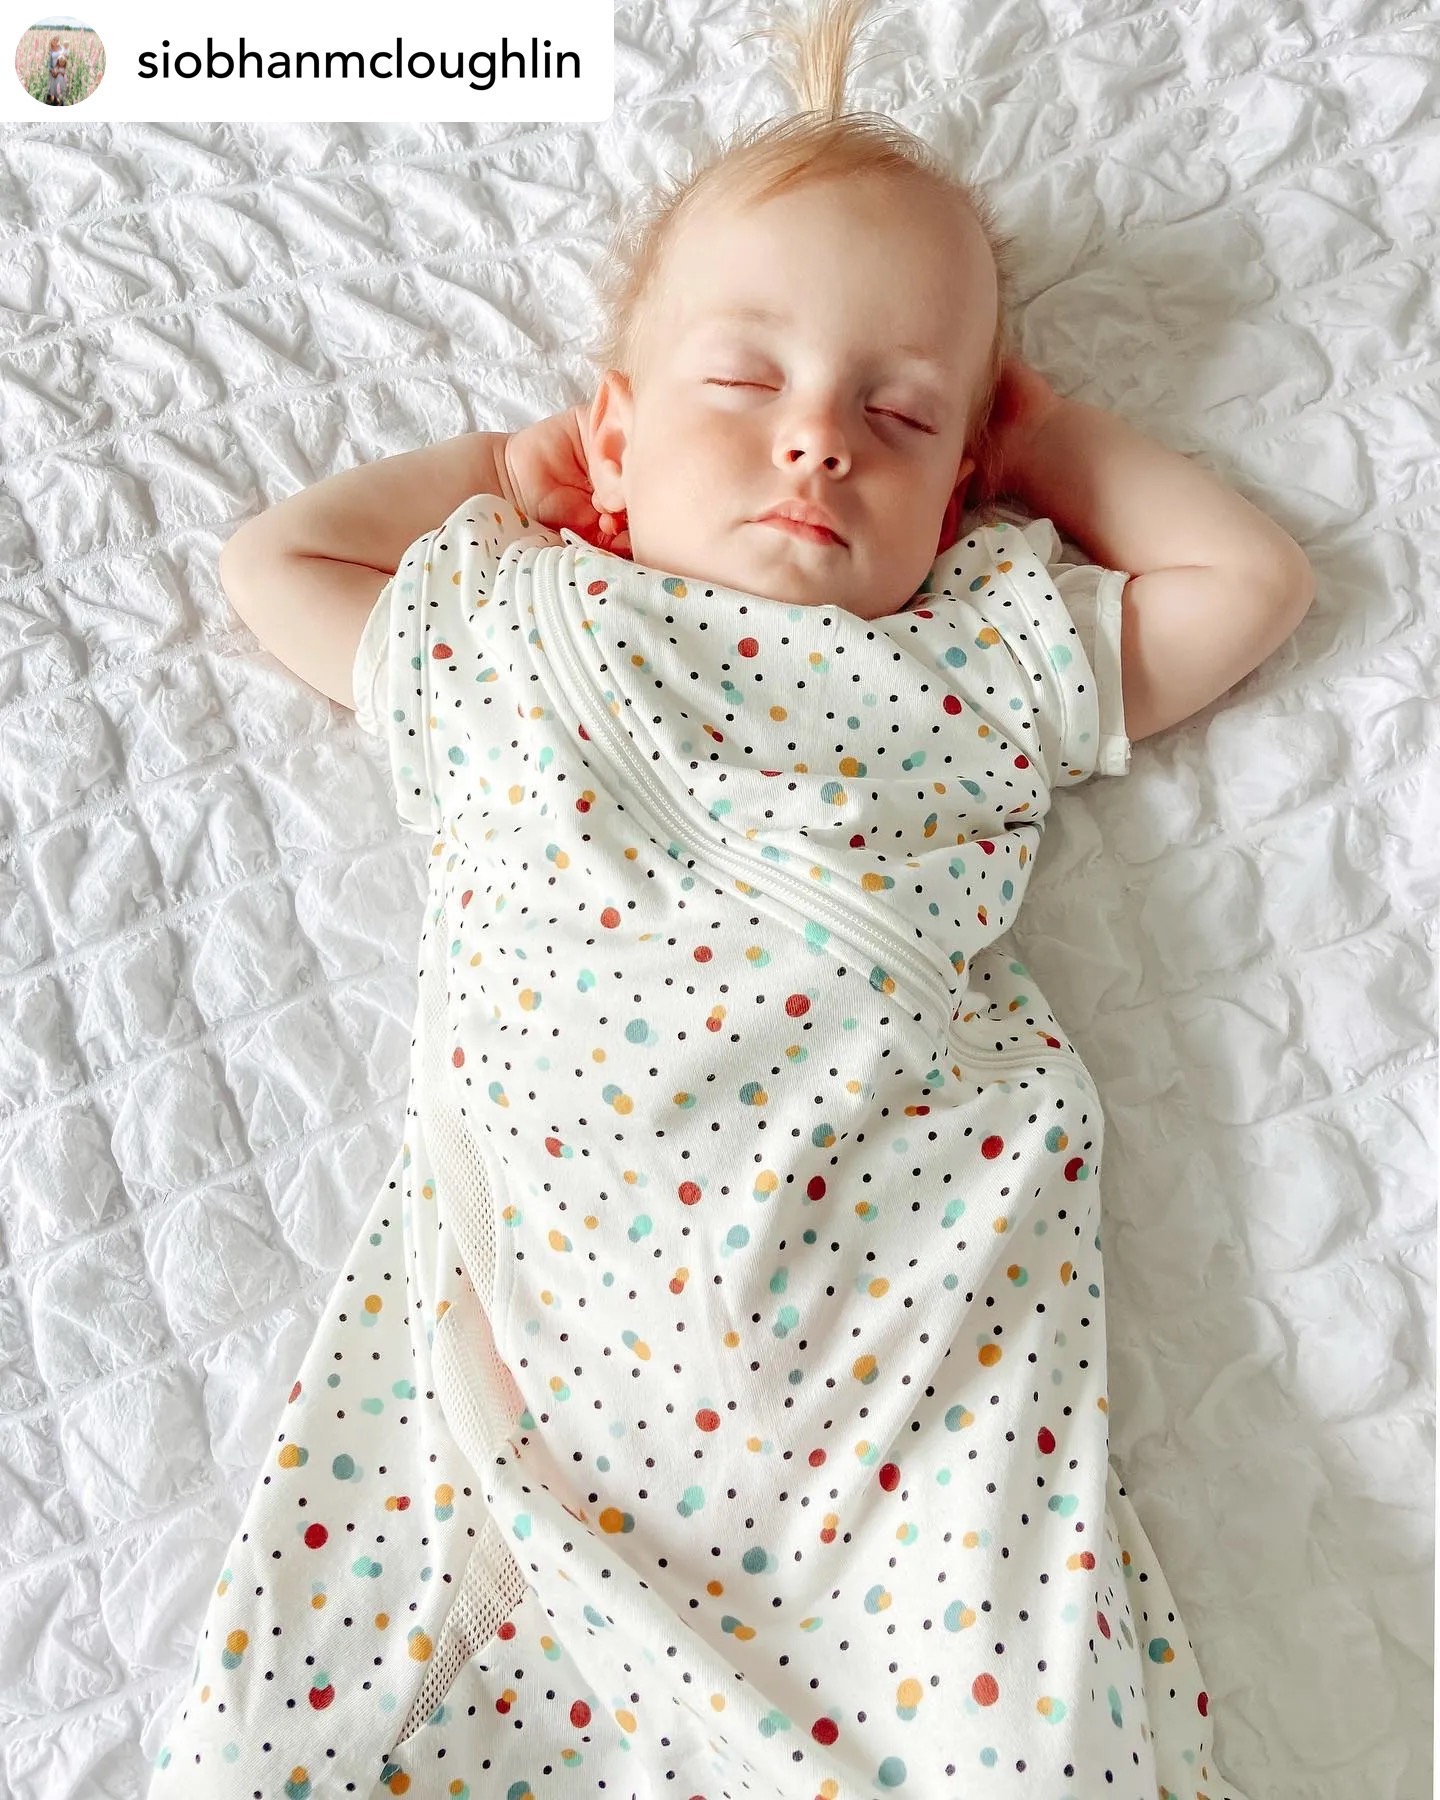 Baby asleep with hands behind head in cot